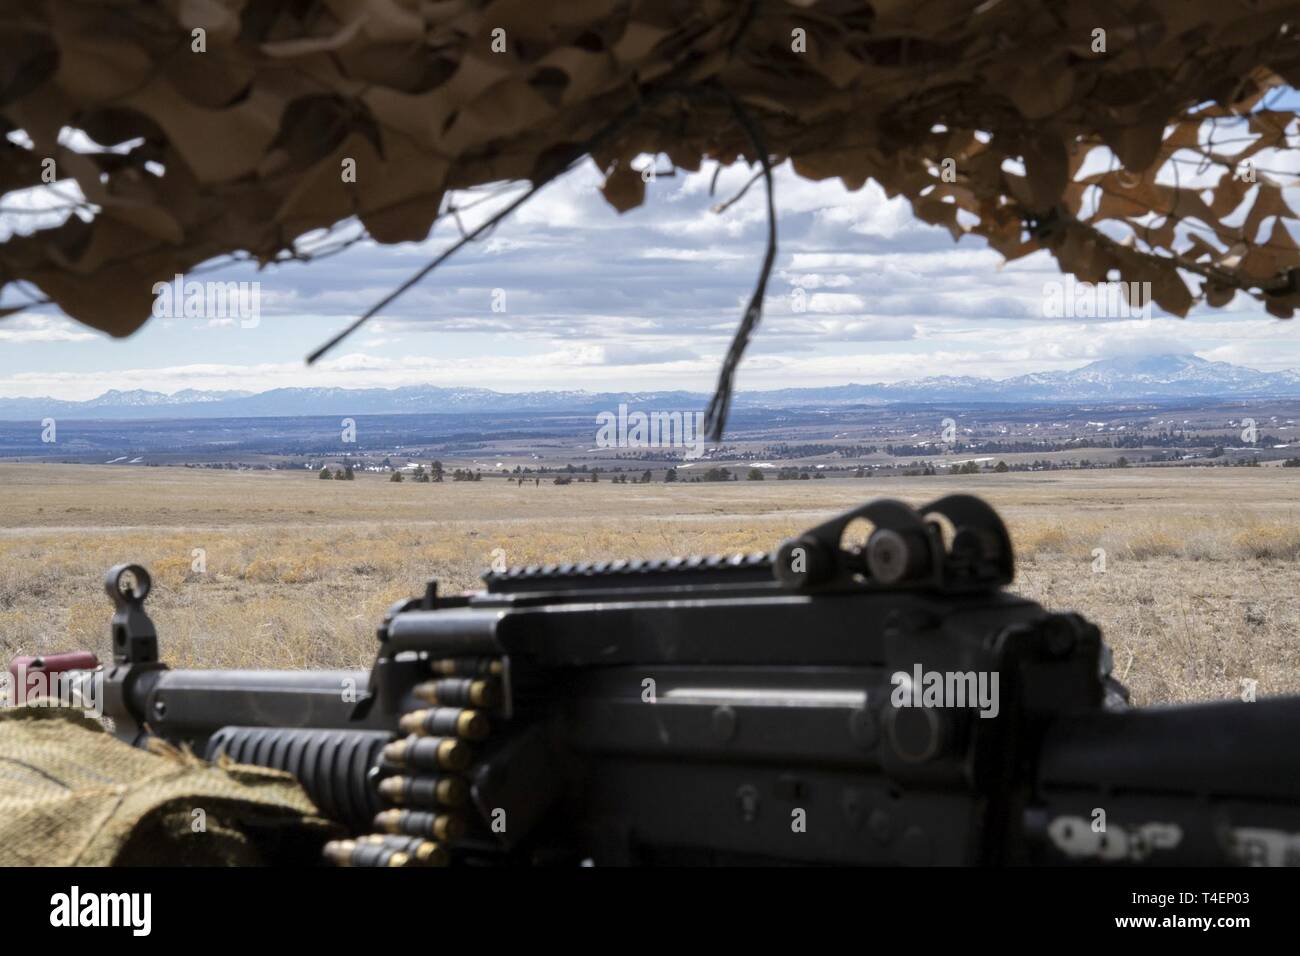 Airmen of the 823d Base Defense Squadron sit in their defensive fighting positions and keep watch during the Mission Readiness Exercise (MRX) at Camp Guernsey, Wyo., March 25, 2019. Airmen dug out the defensive fighting positions around the camp to establish perimeter security. Stock Photo